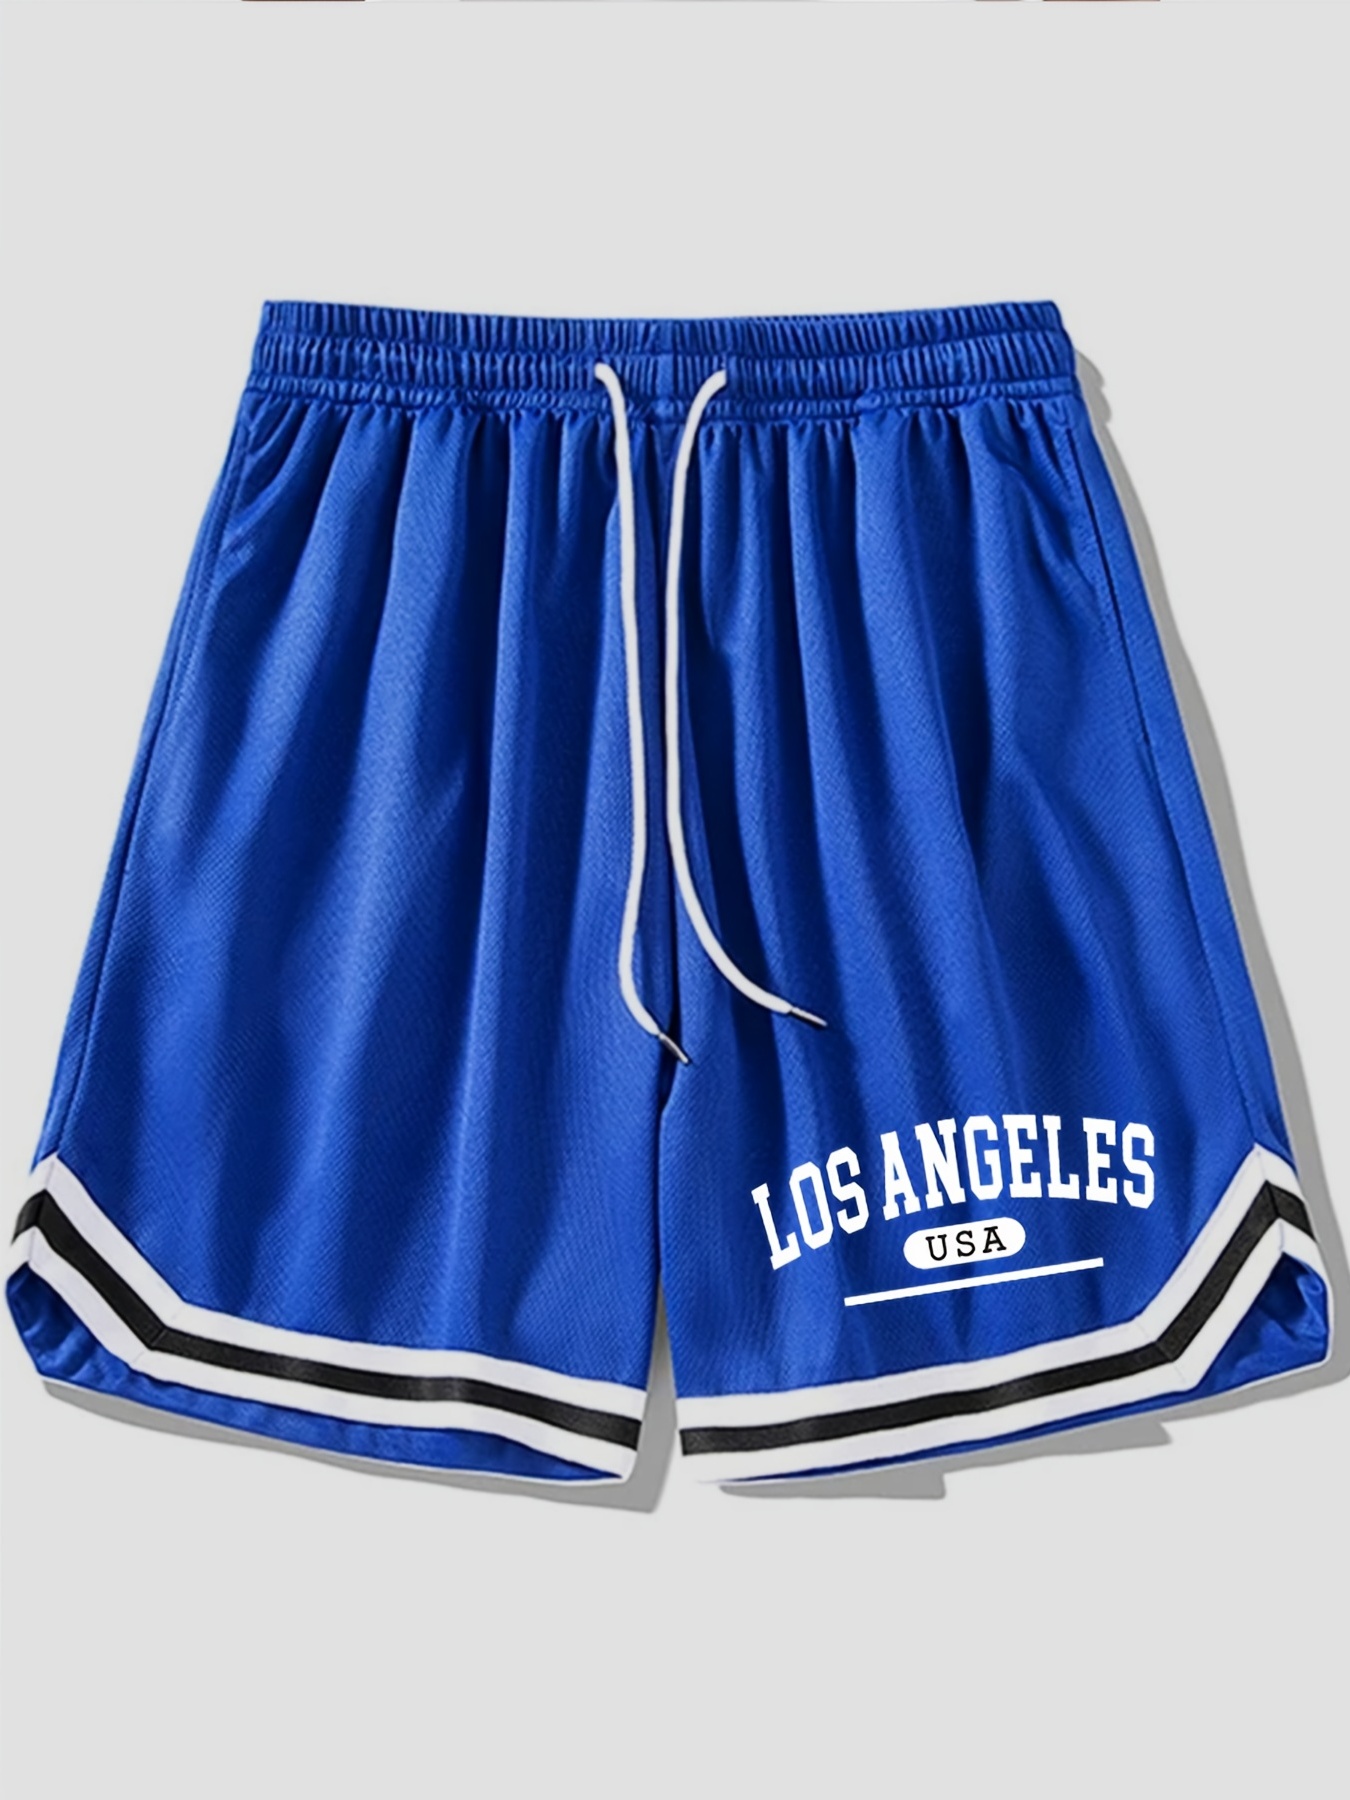 Summer Mens Shorts Los Angeles Striped Athletic Basketball Drawstring Shorts, Today's Best Daily Deals